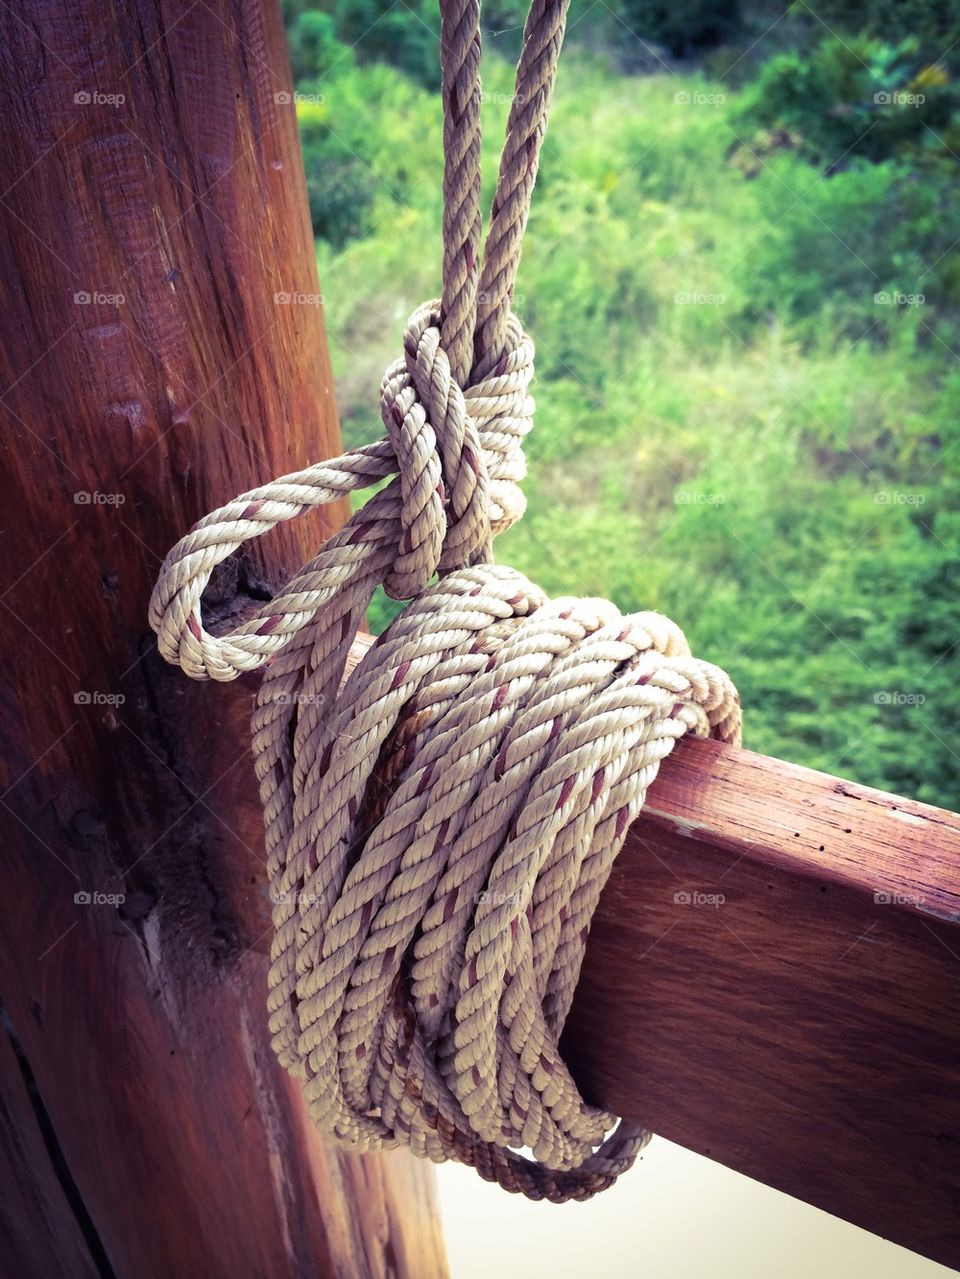 The rope tie a knot